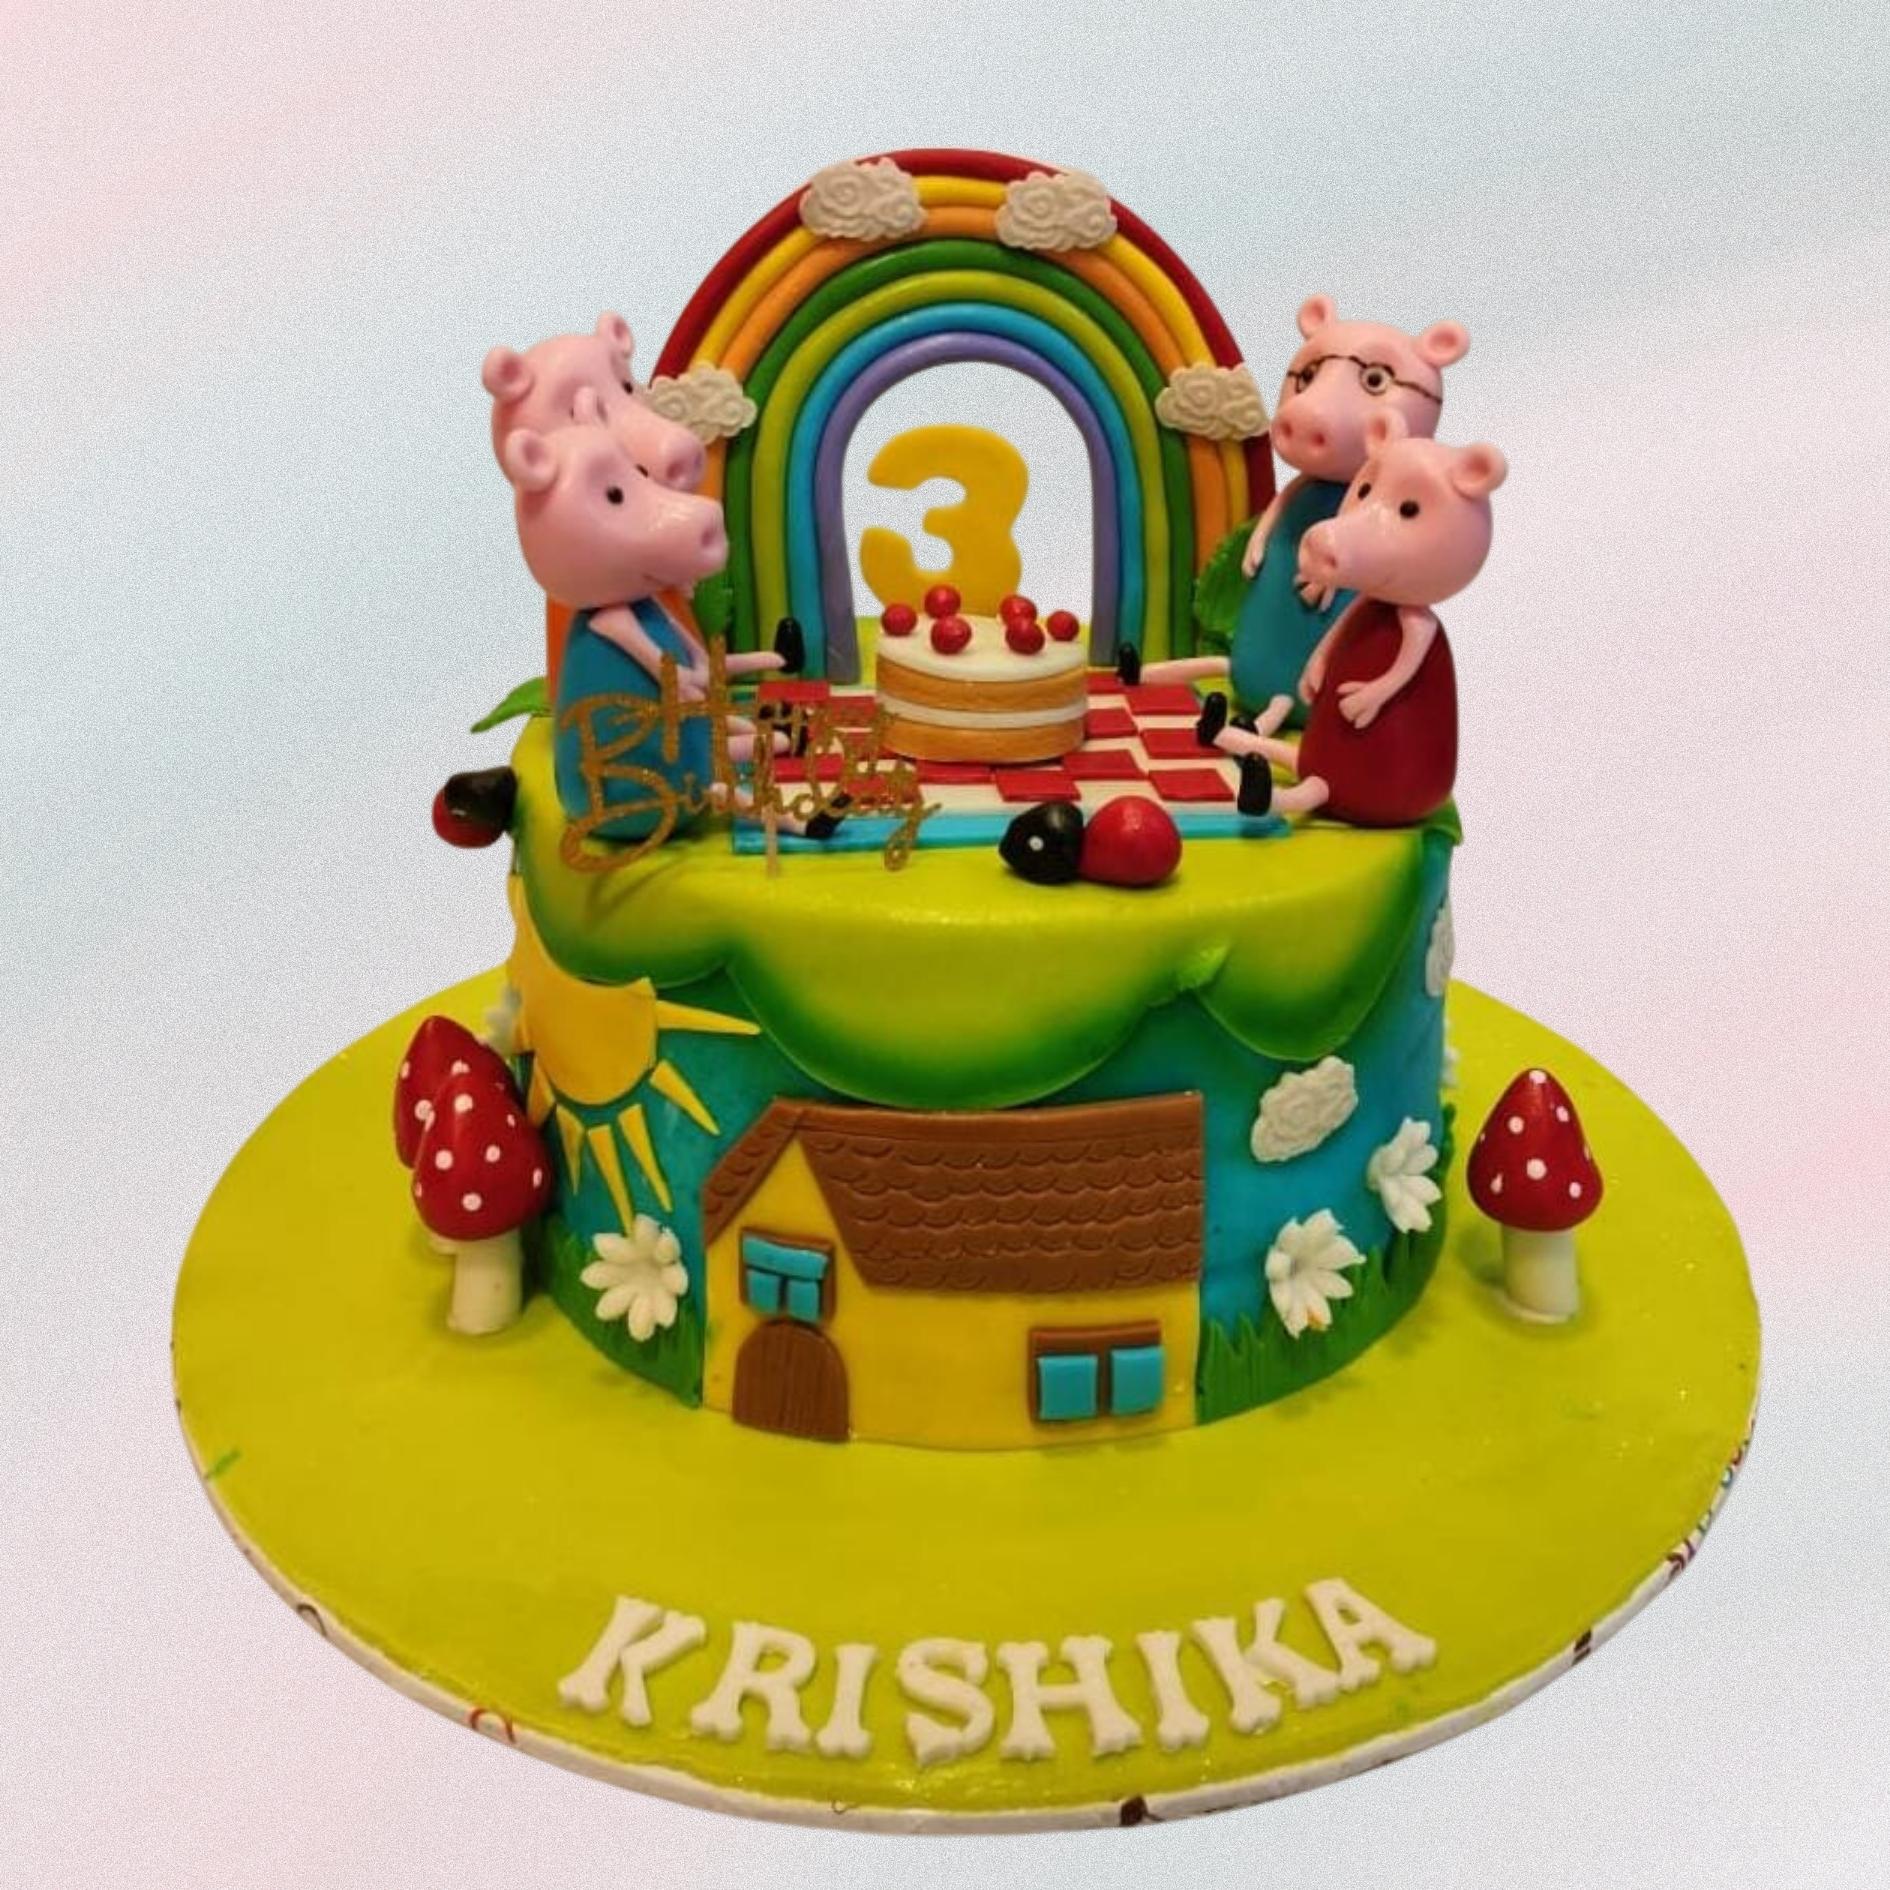 8 in 1 Peppa Pig Cake Toppers|Peppa Pig Cake|Birthday Banner, Hobbies &  Toys, Stationery & Craft, Occasions & Party Supplies on Carousell